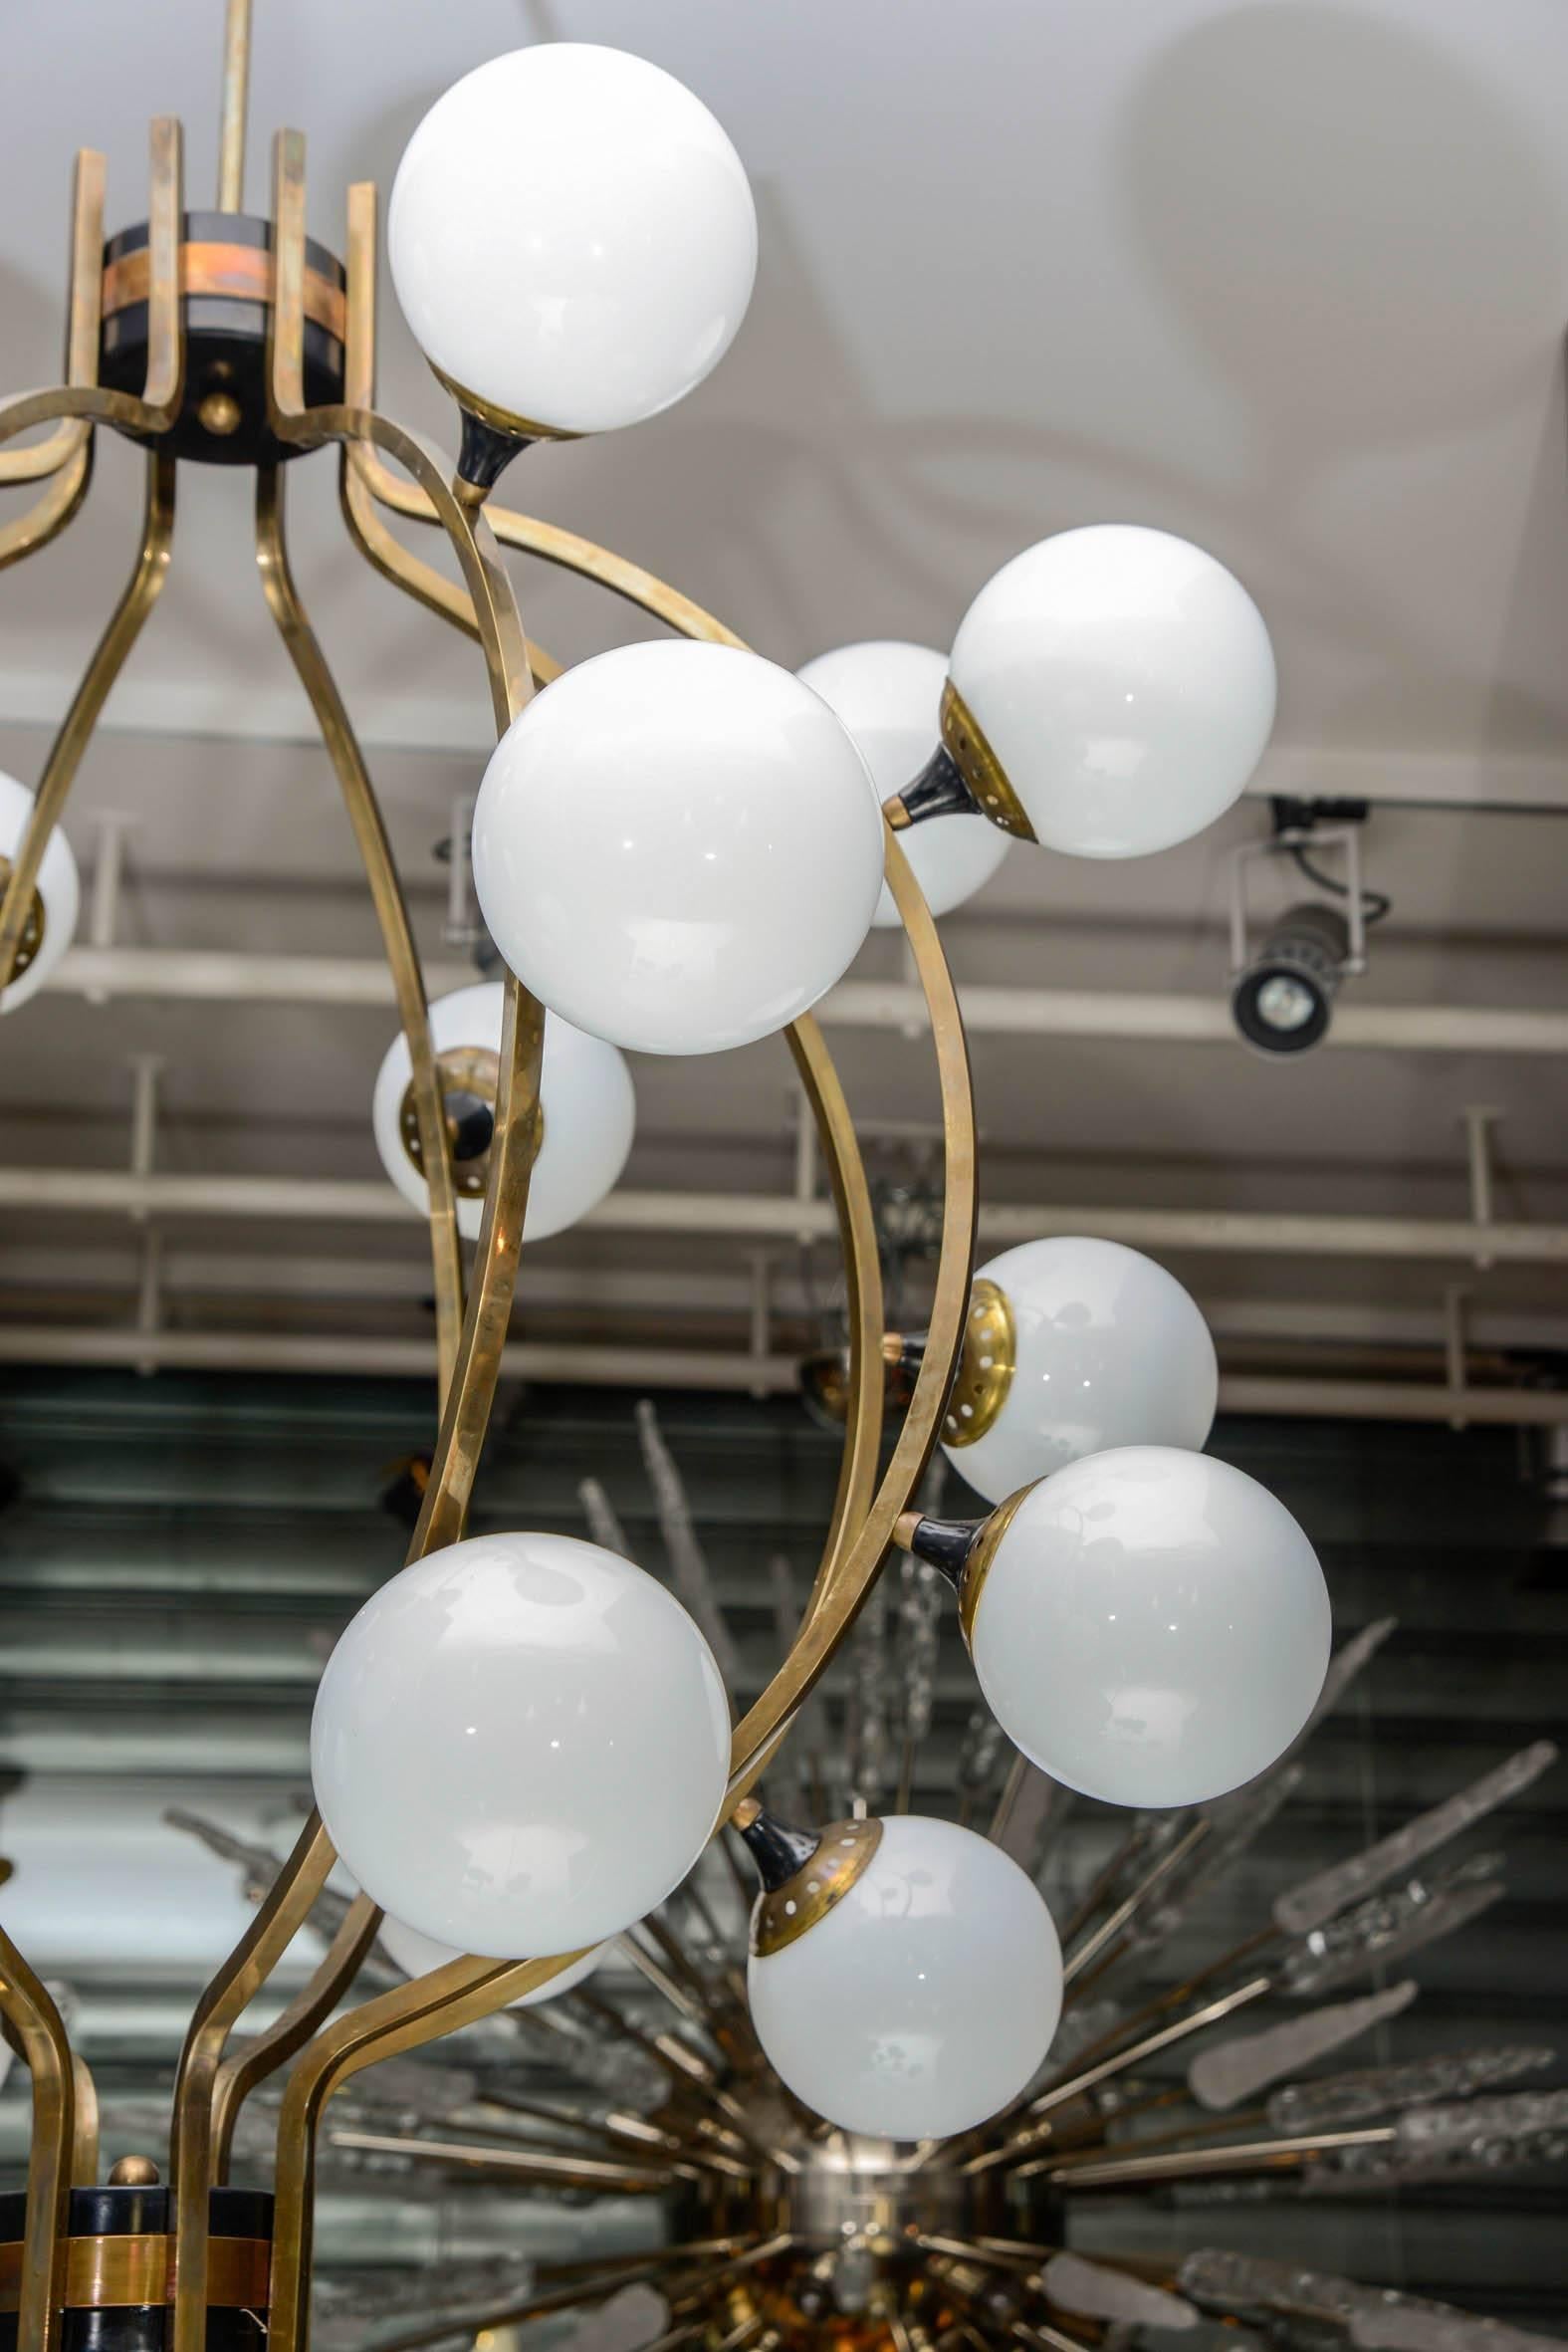 Italian Cage Style Globes Chandeliers